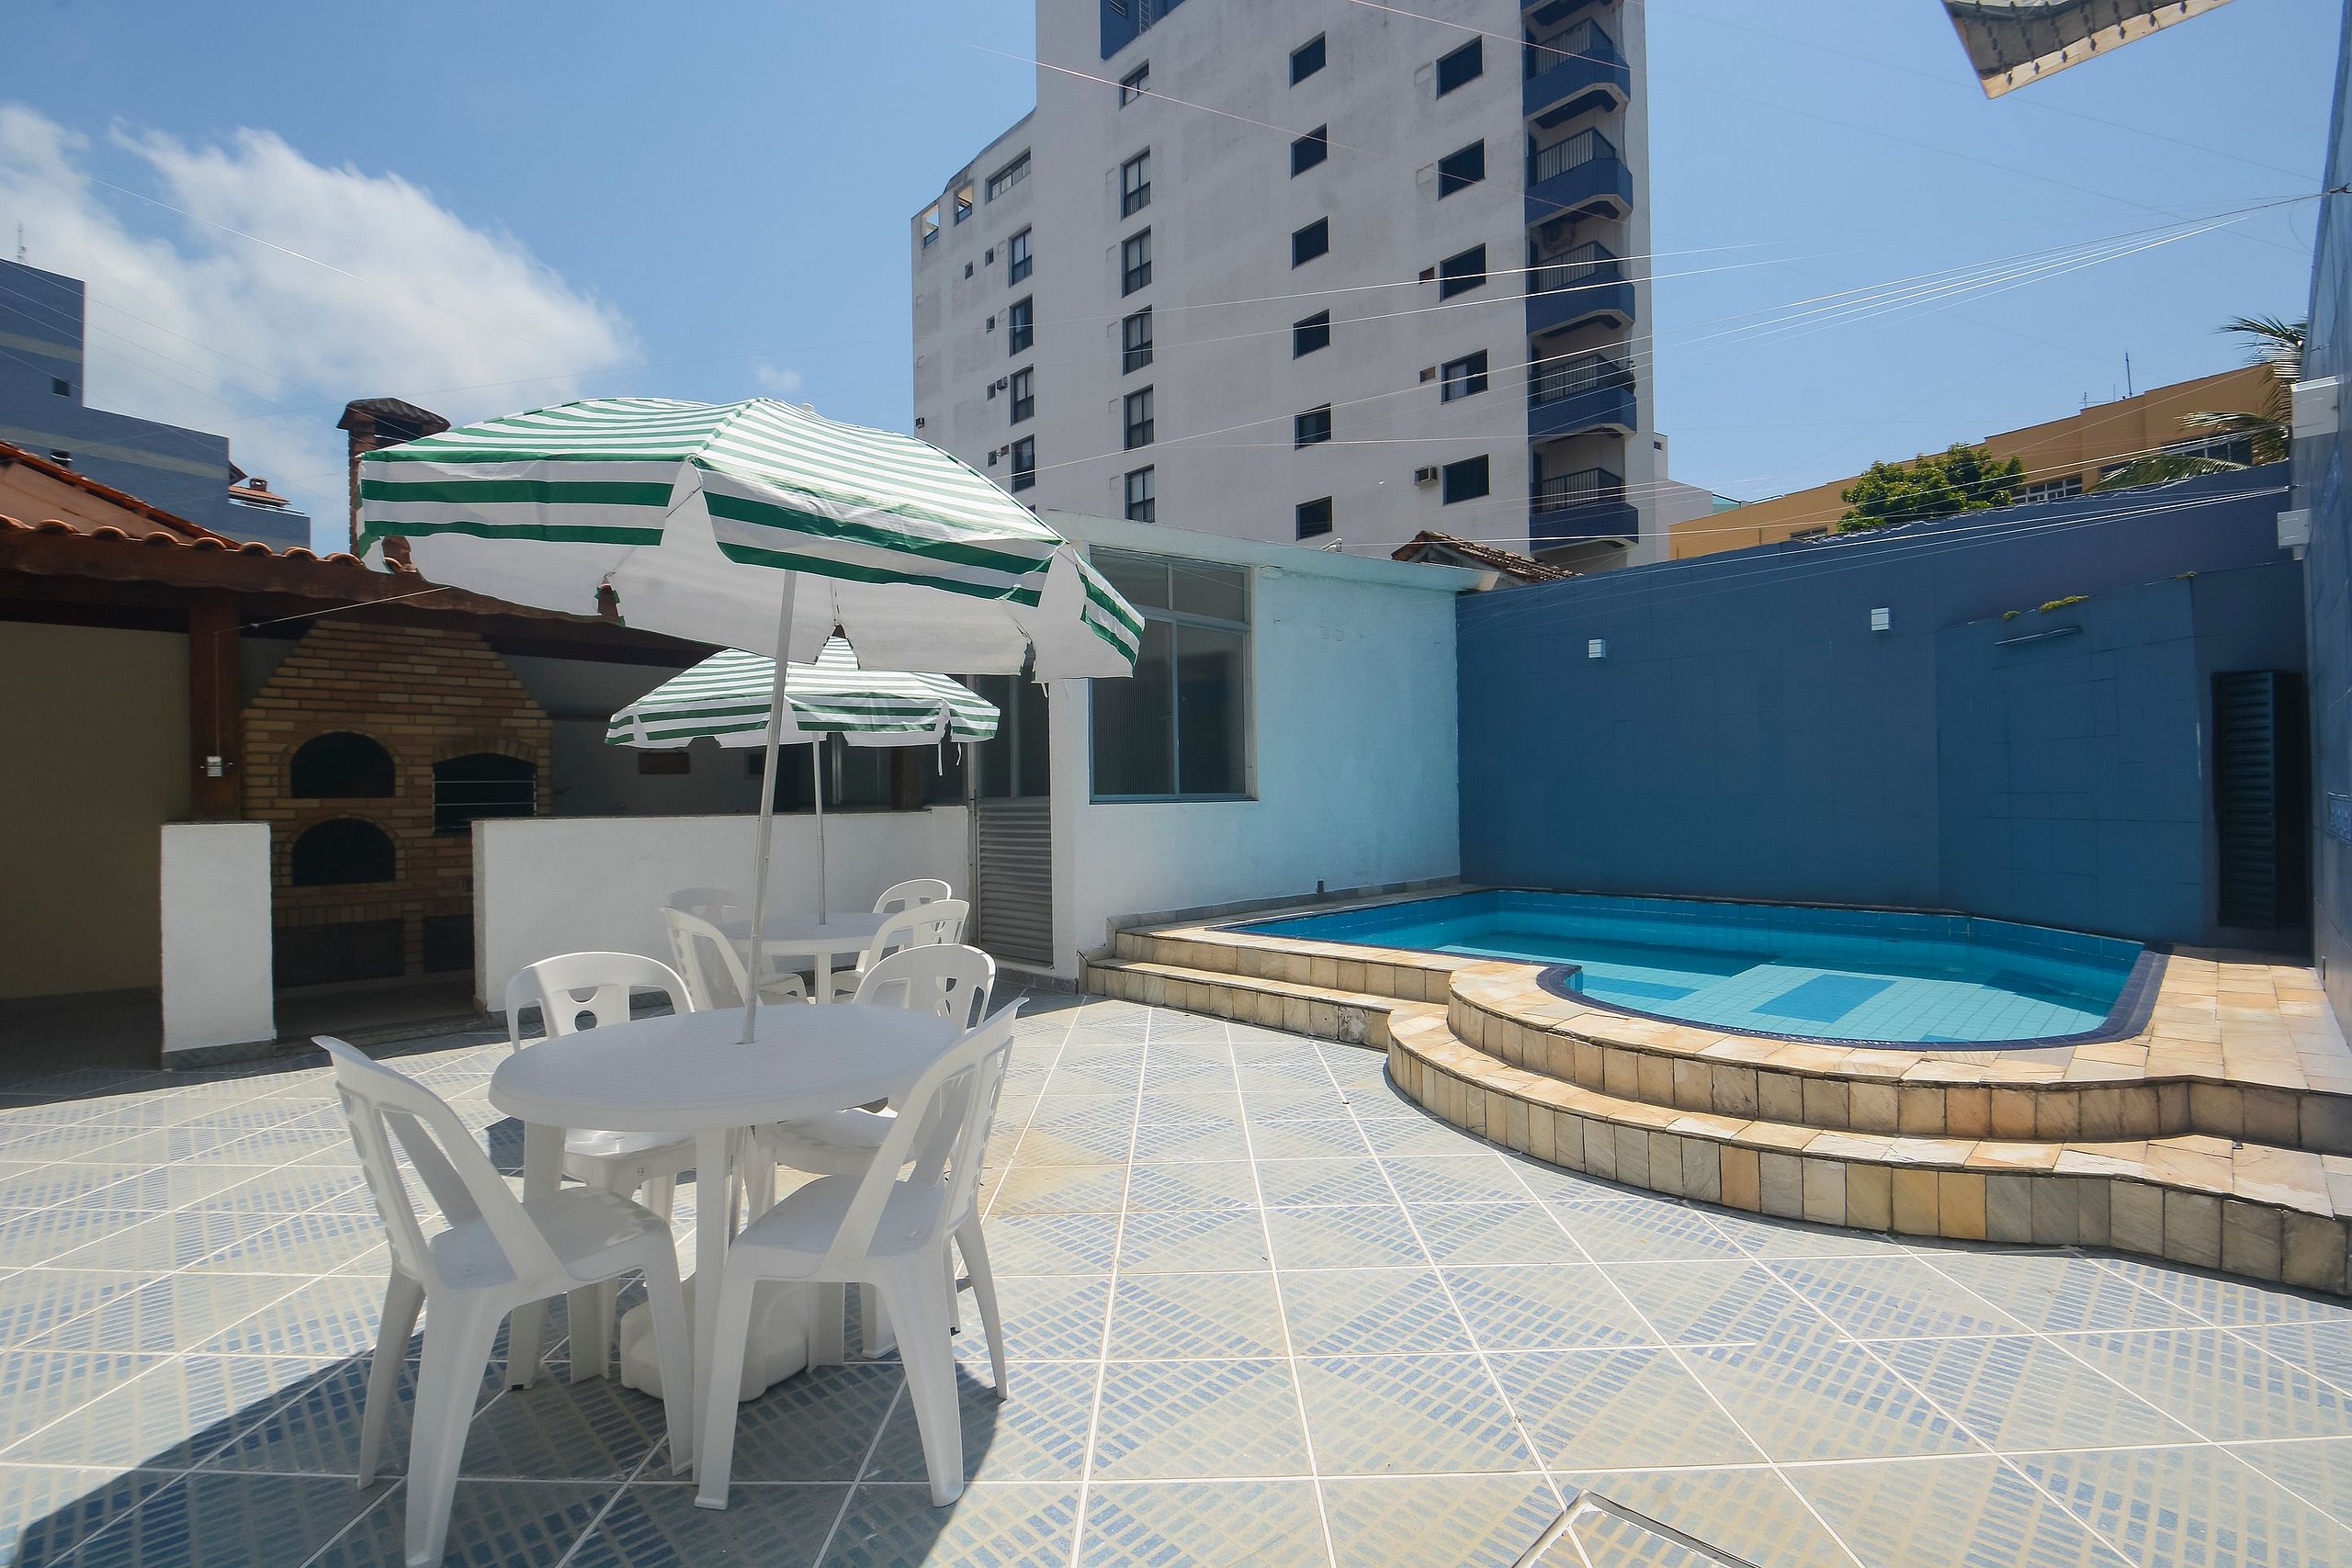 Property Image 1 - House with pool 200m from Tombo beach in Guarujá